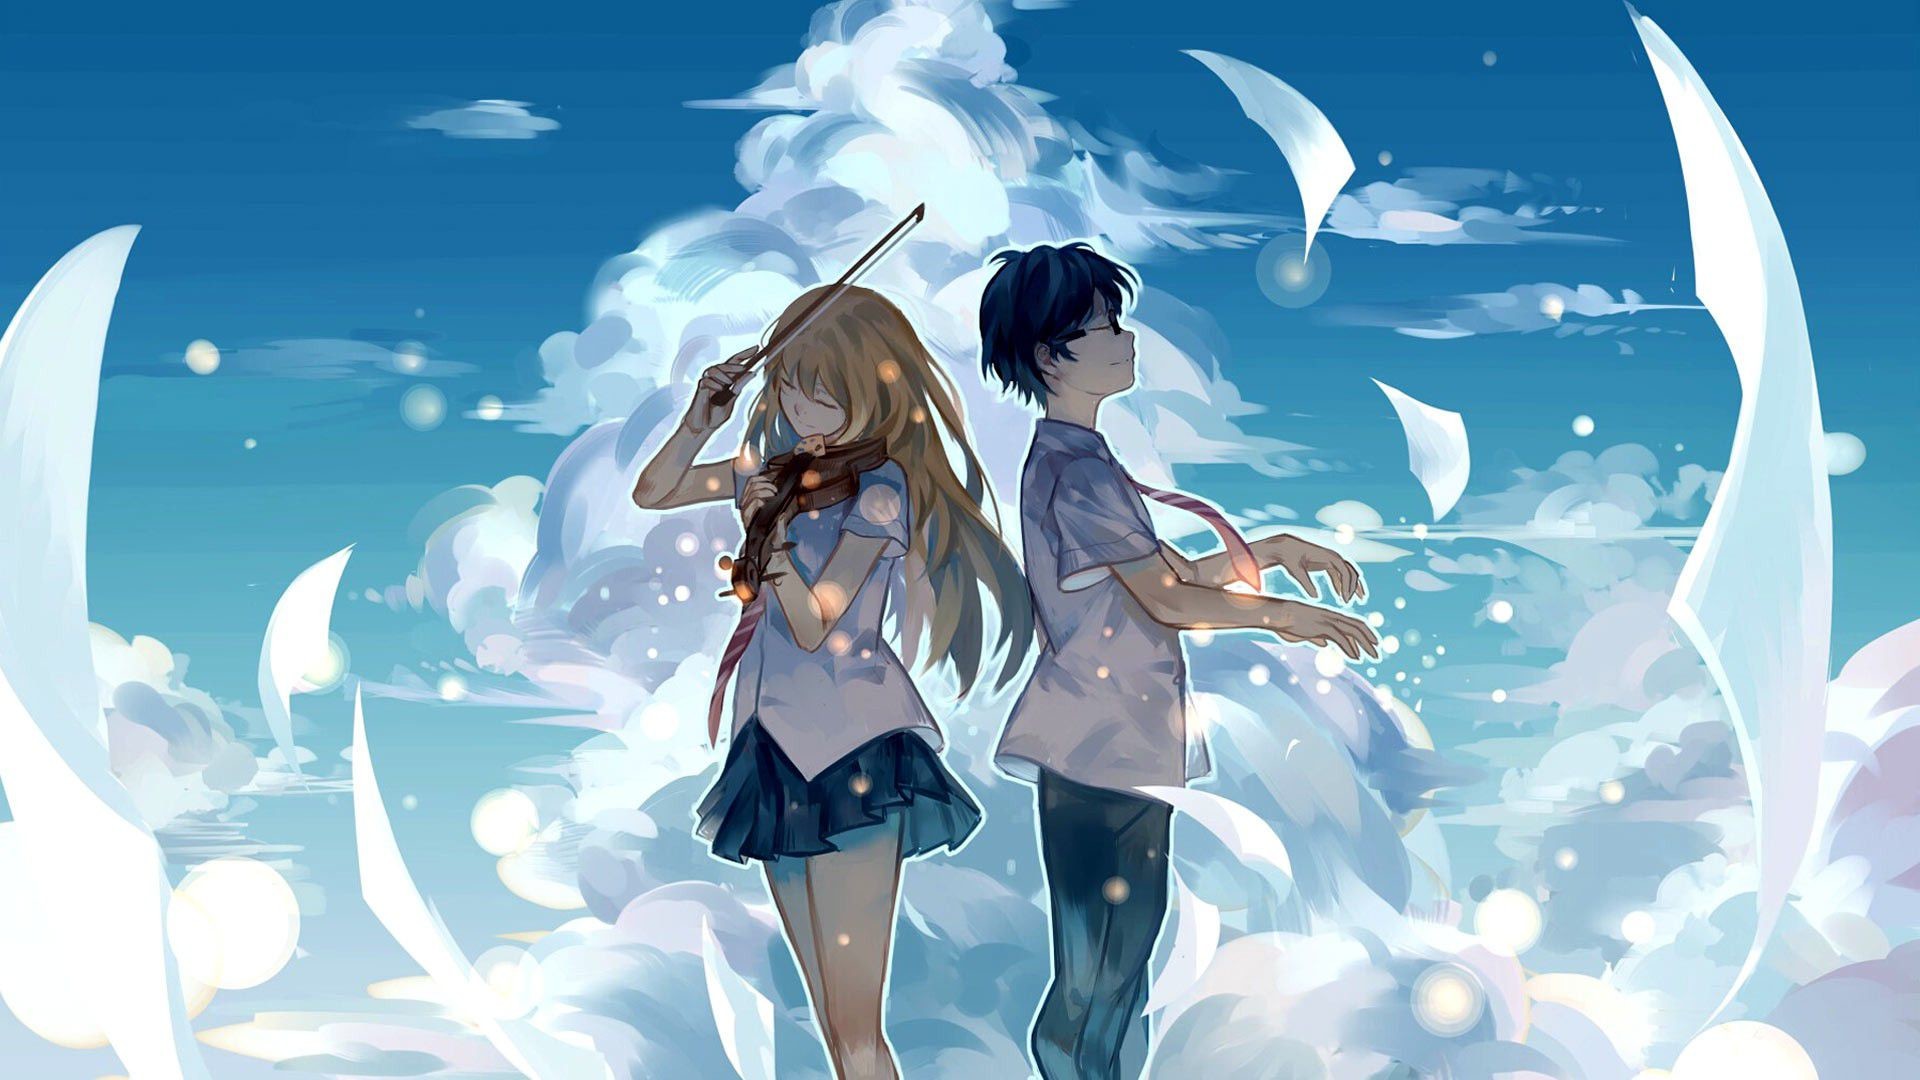 Anime Couple Wallpapers For Mobile - Wallpaper Cave